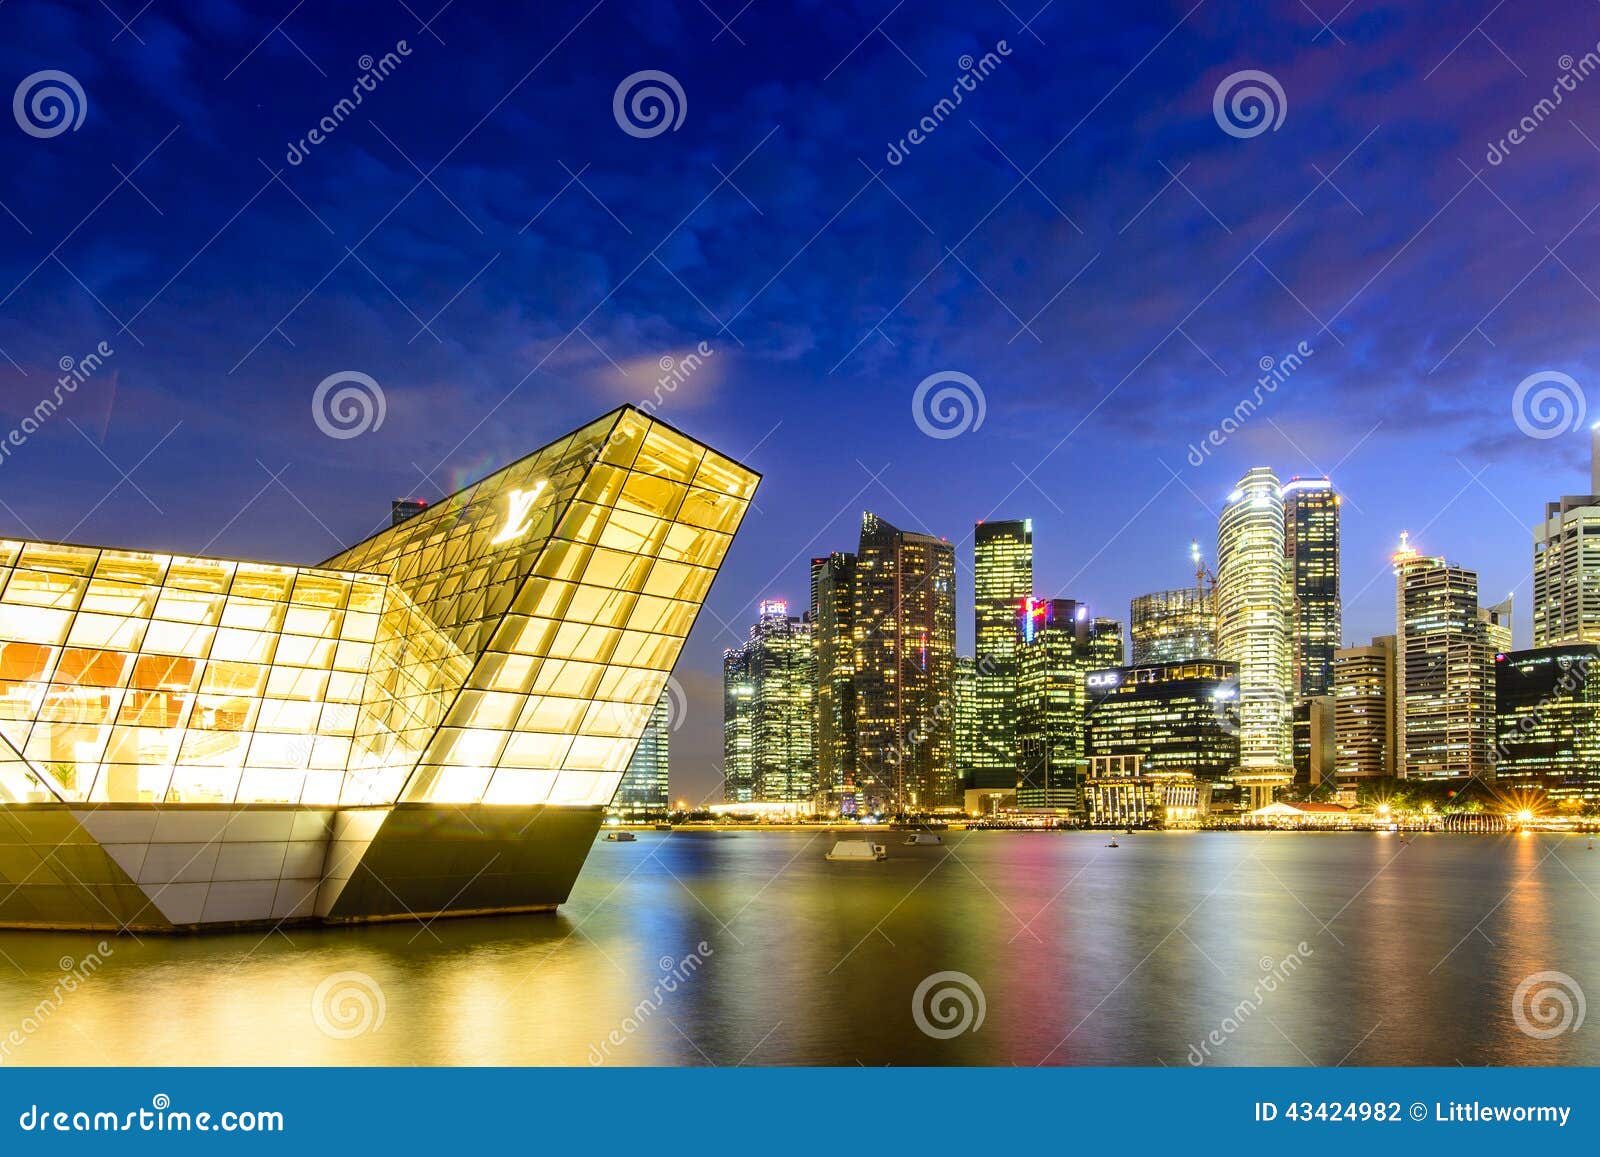 Louis Vuitton Shop In Marina Bay Editorial Photography - Image of light, architectural: 43424982